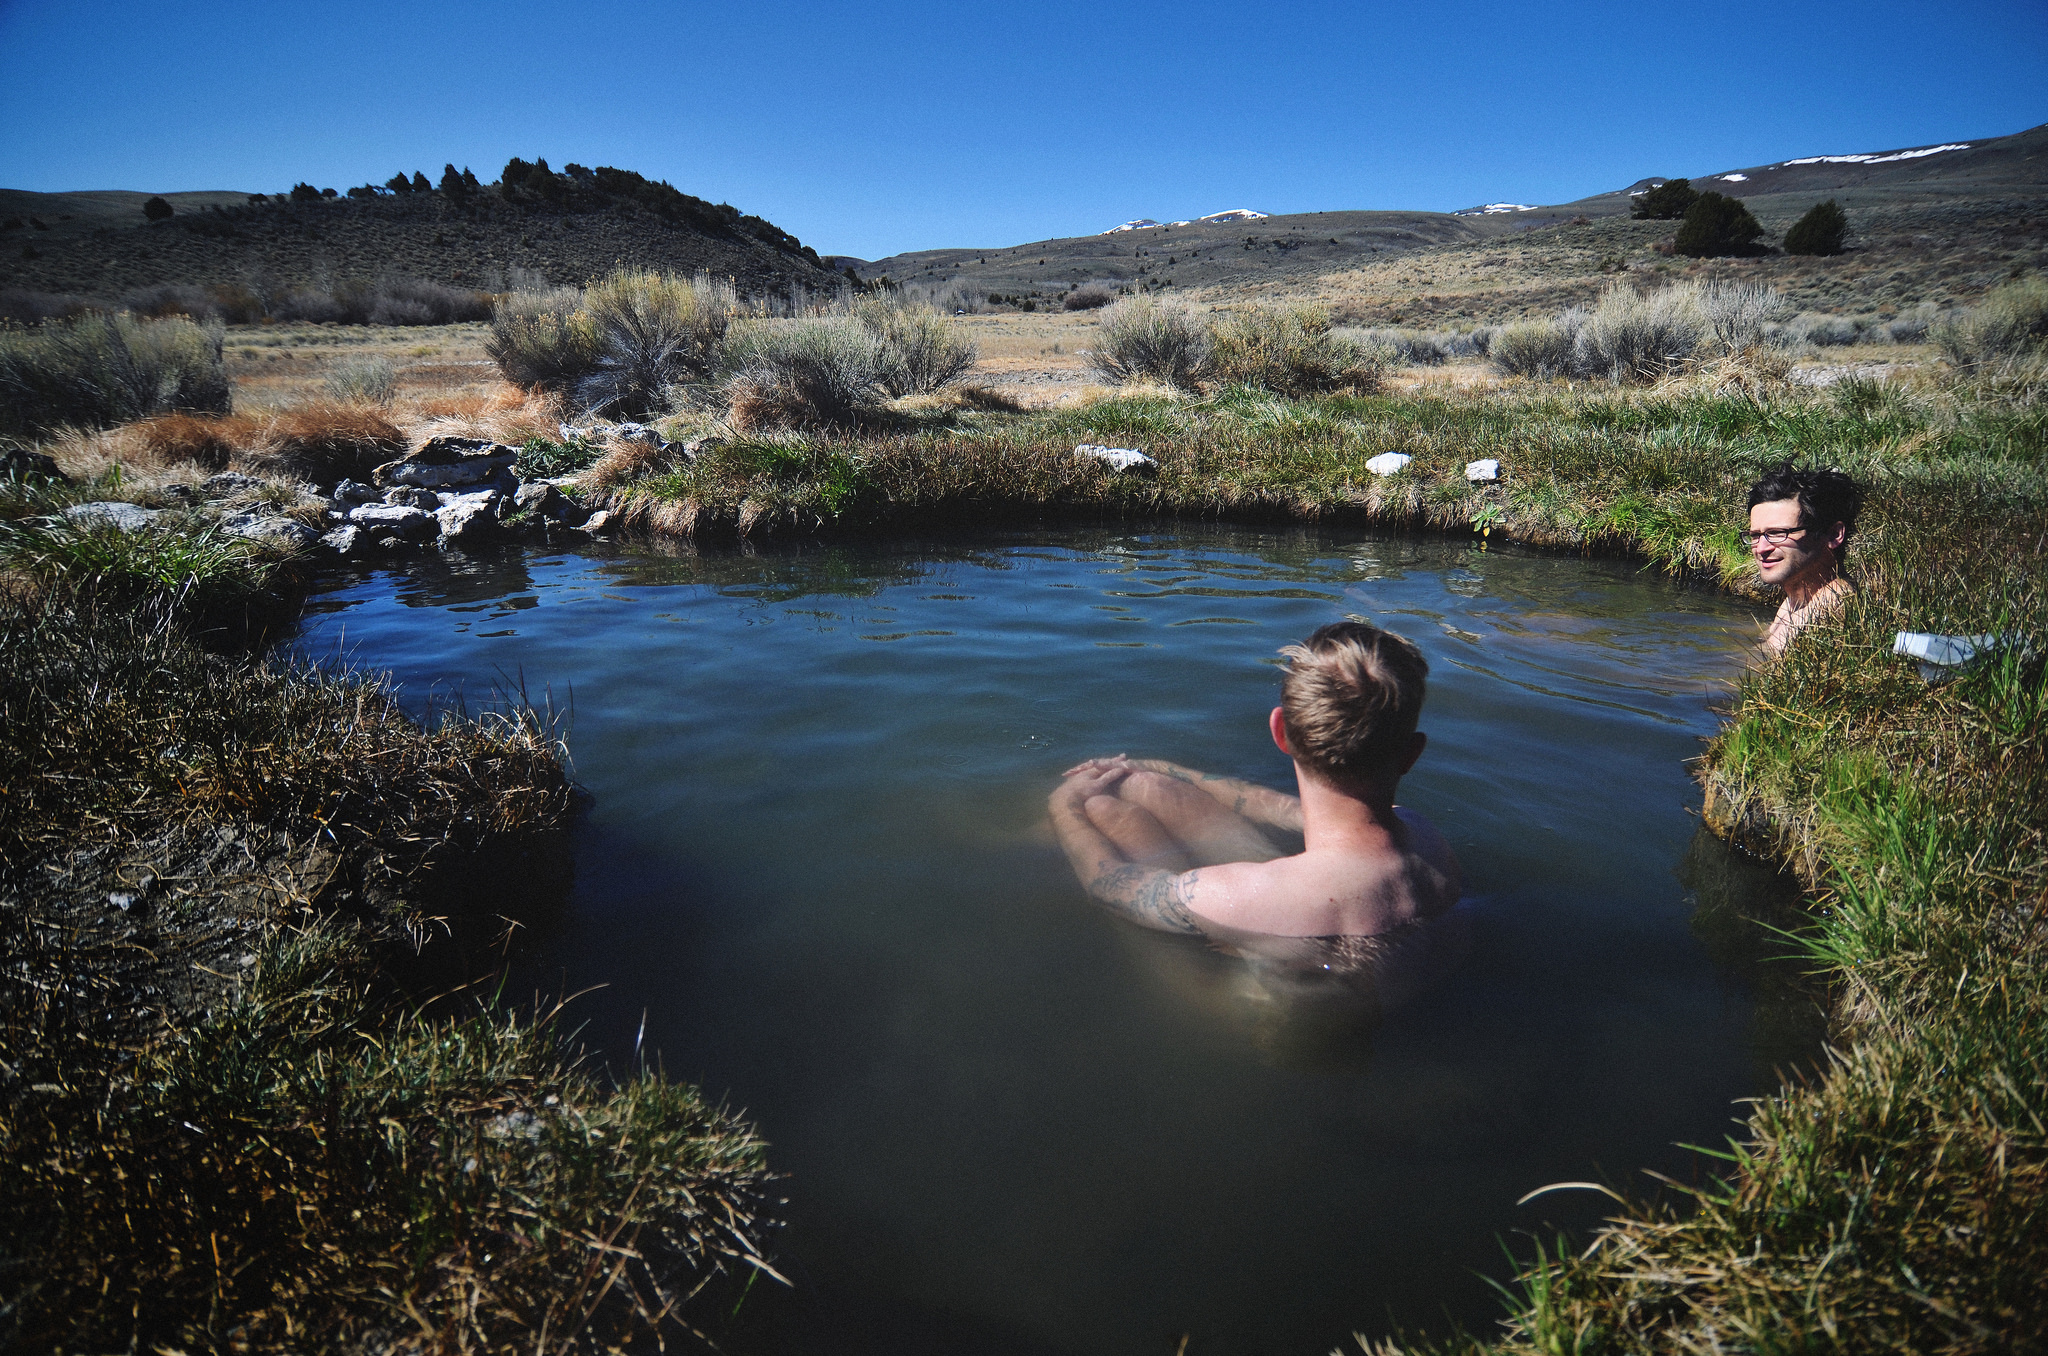 Spend A Relaxing Afternoon At These 10 Hot Springs In Oregon.